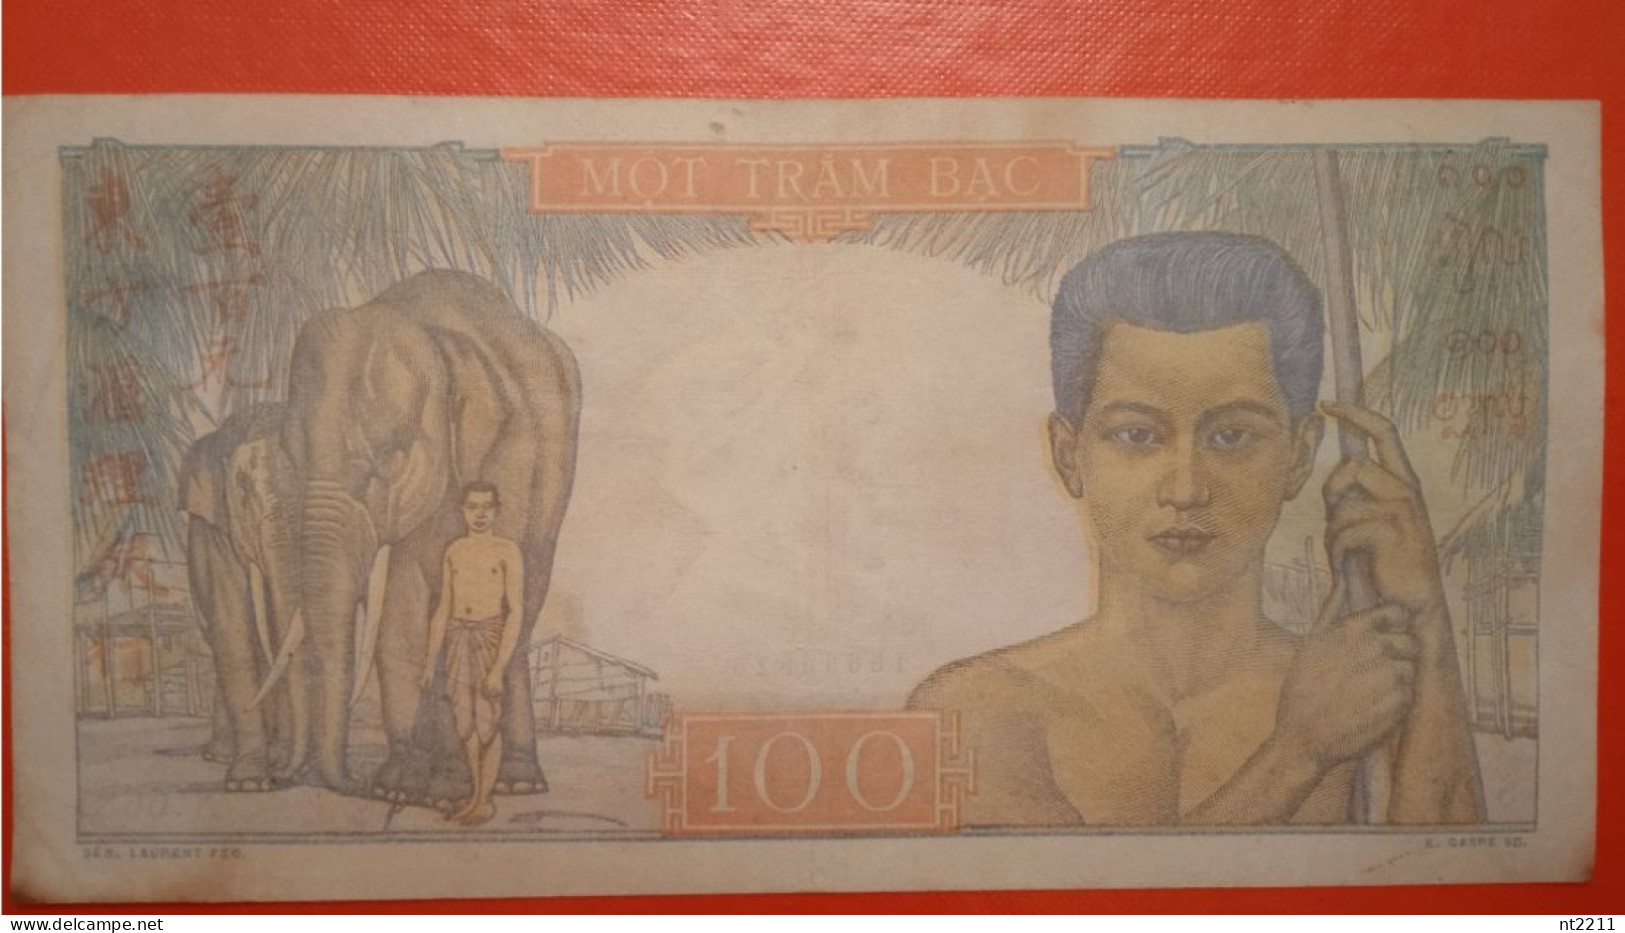 Banknote 100 Piastres French Indochina - Indocina